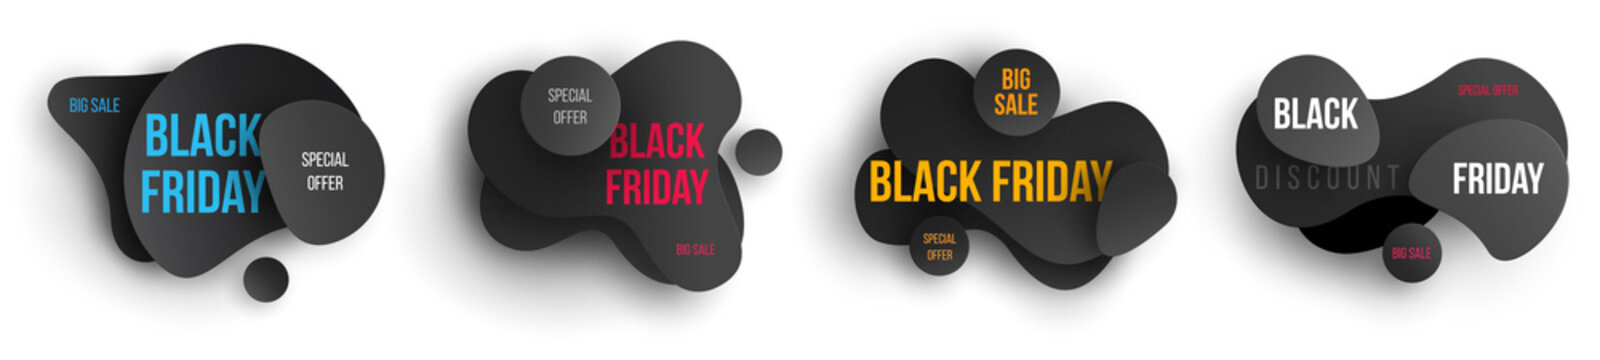 Black friday sale concept. Set of composition for branding banner, label, sticker, flyer, card in 3d paper cut style. Design promotion shop or market. Vector illustration isolated on white background.